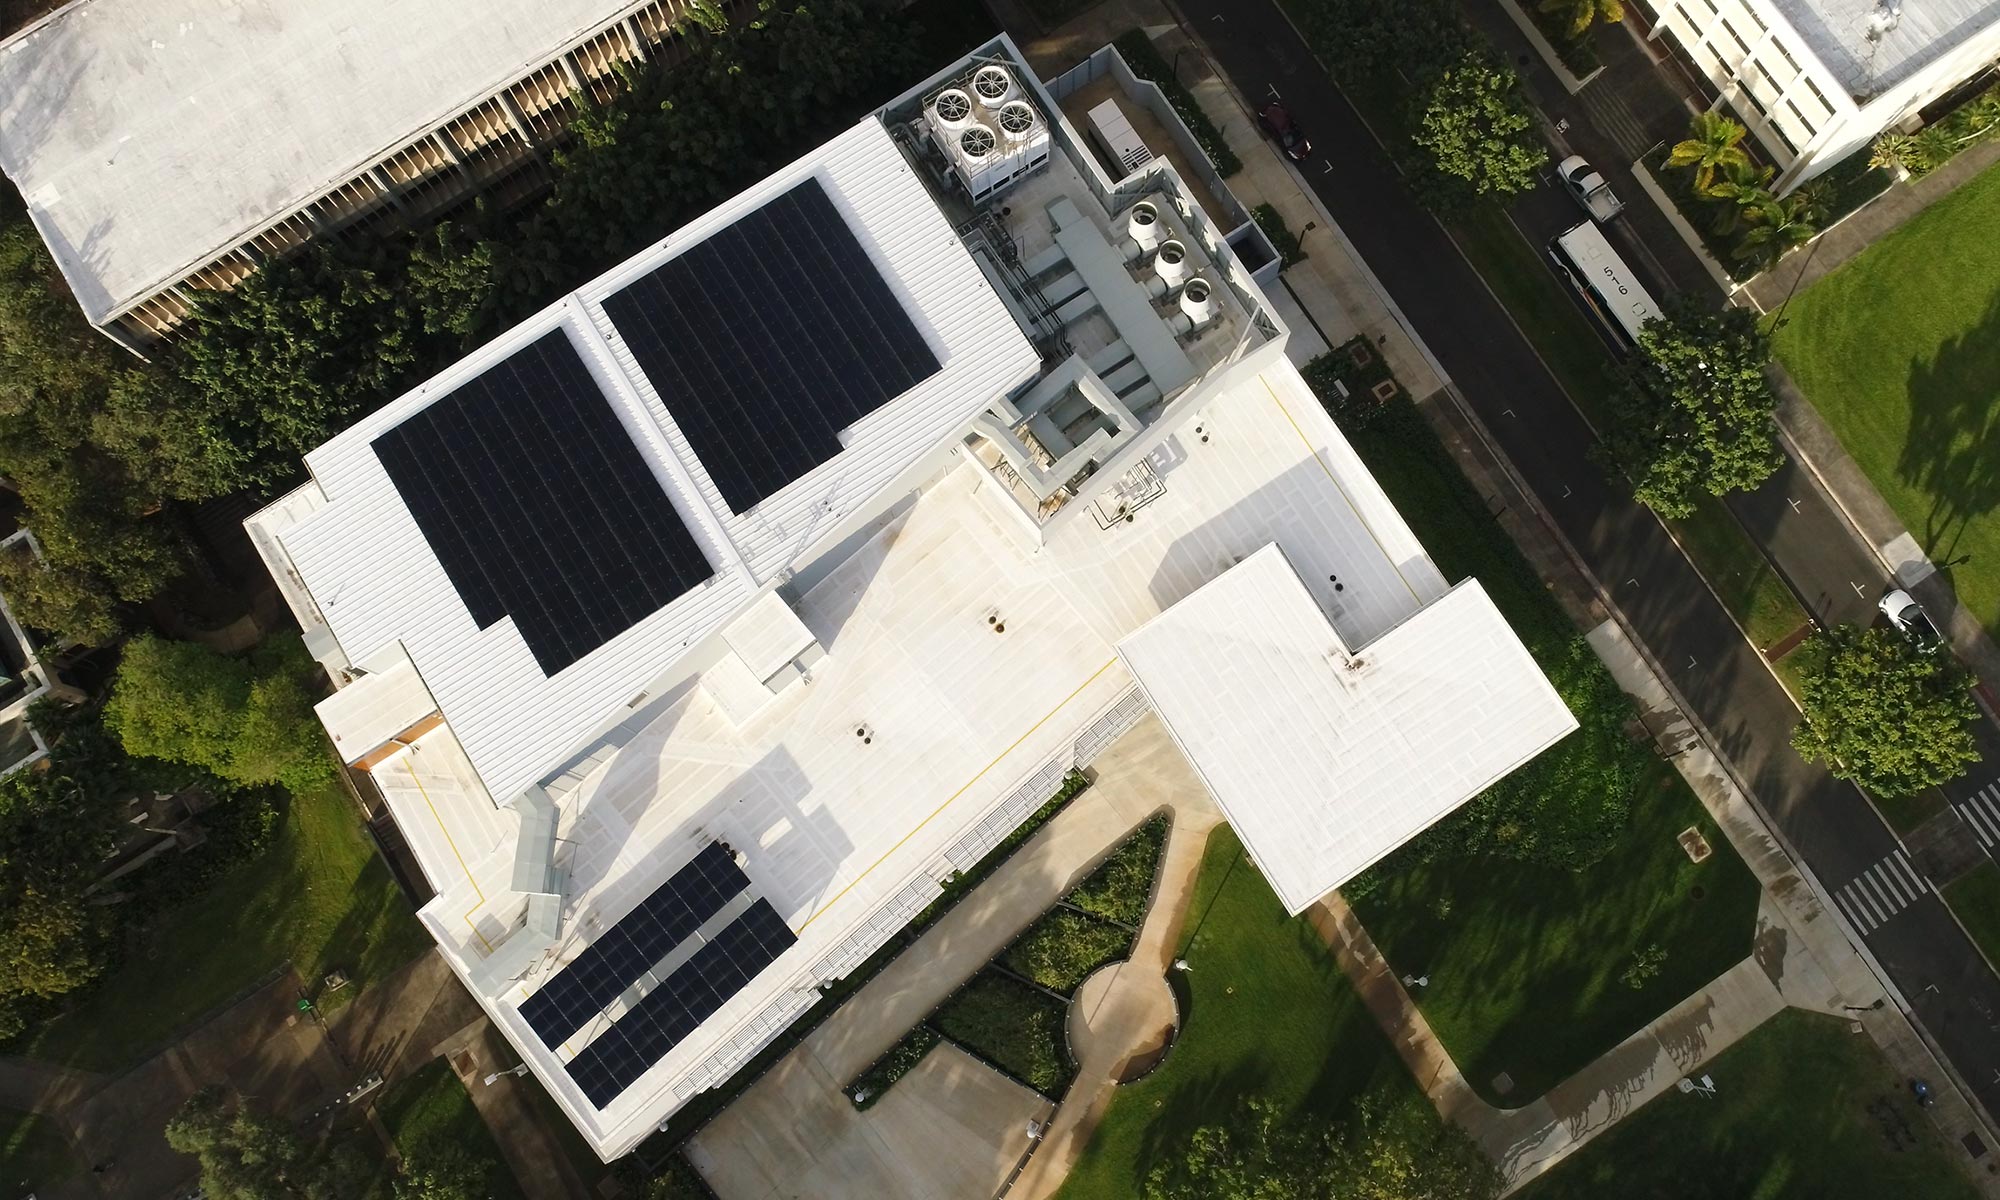 Aerial view of the Life Sciences Building showing rooftop photovoltaic panels.